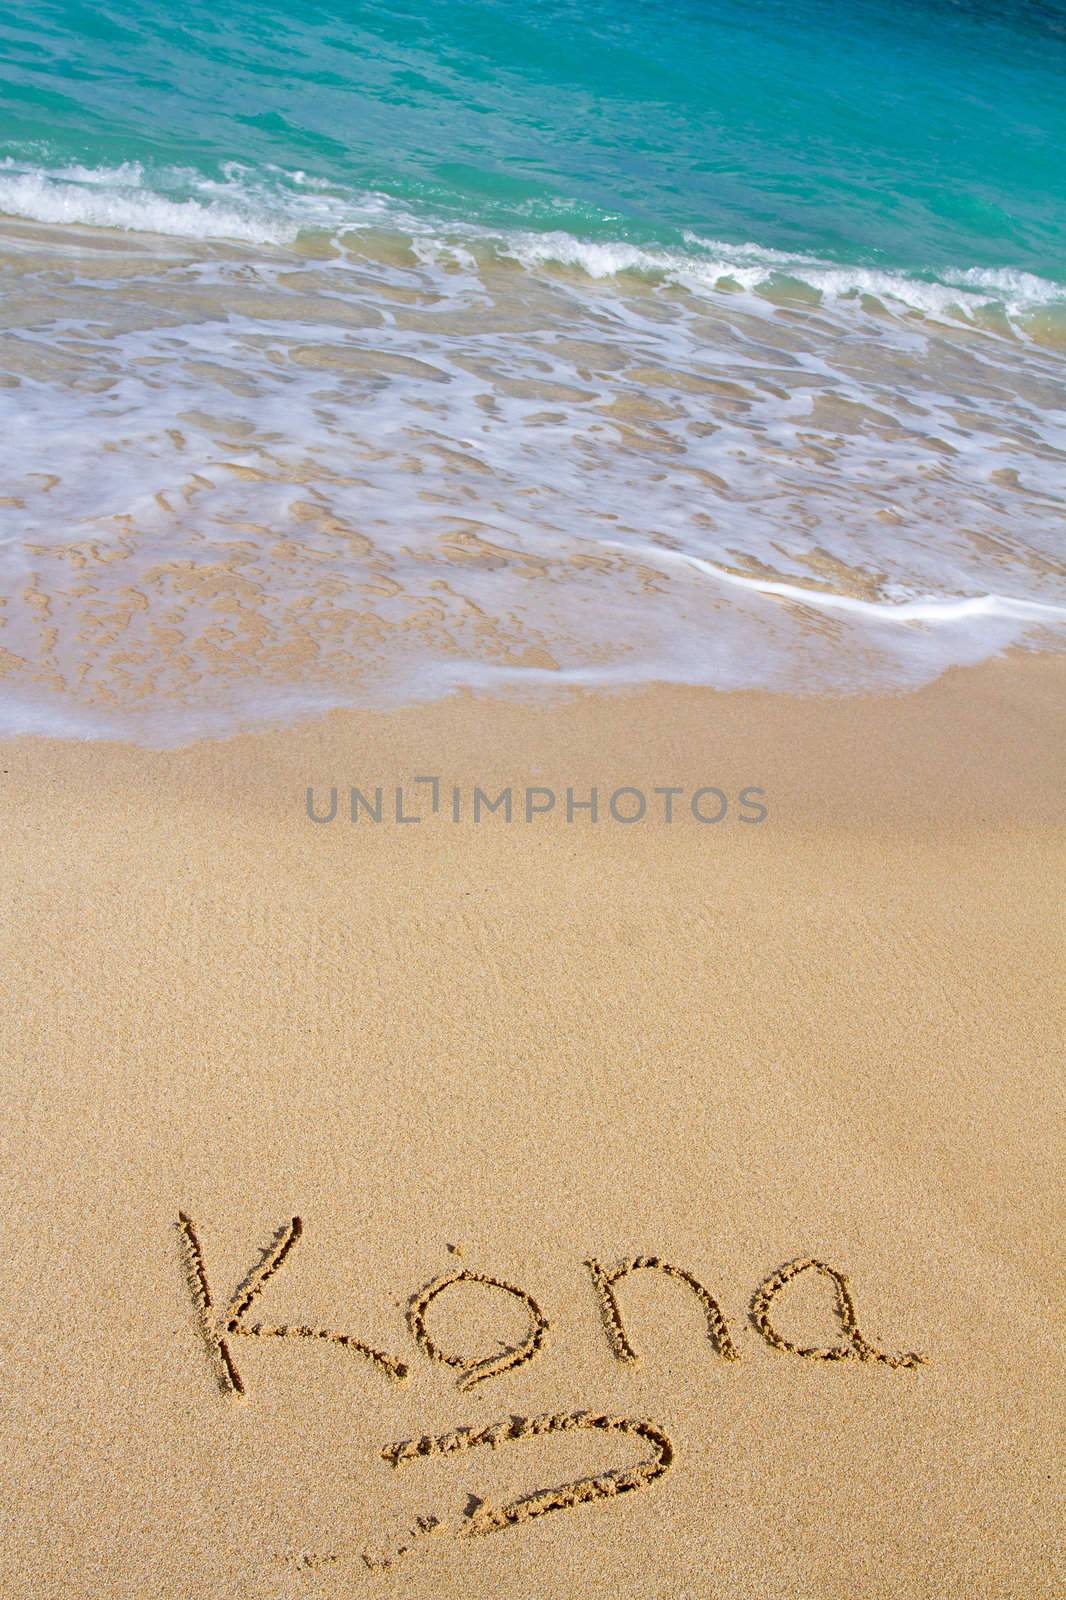 This vacation image shows the word Kona written in the sand with the Ocean water waves coming in to wash the writing away.